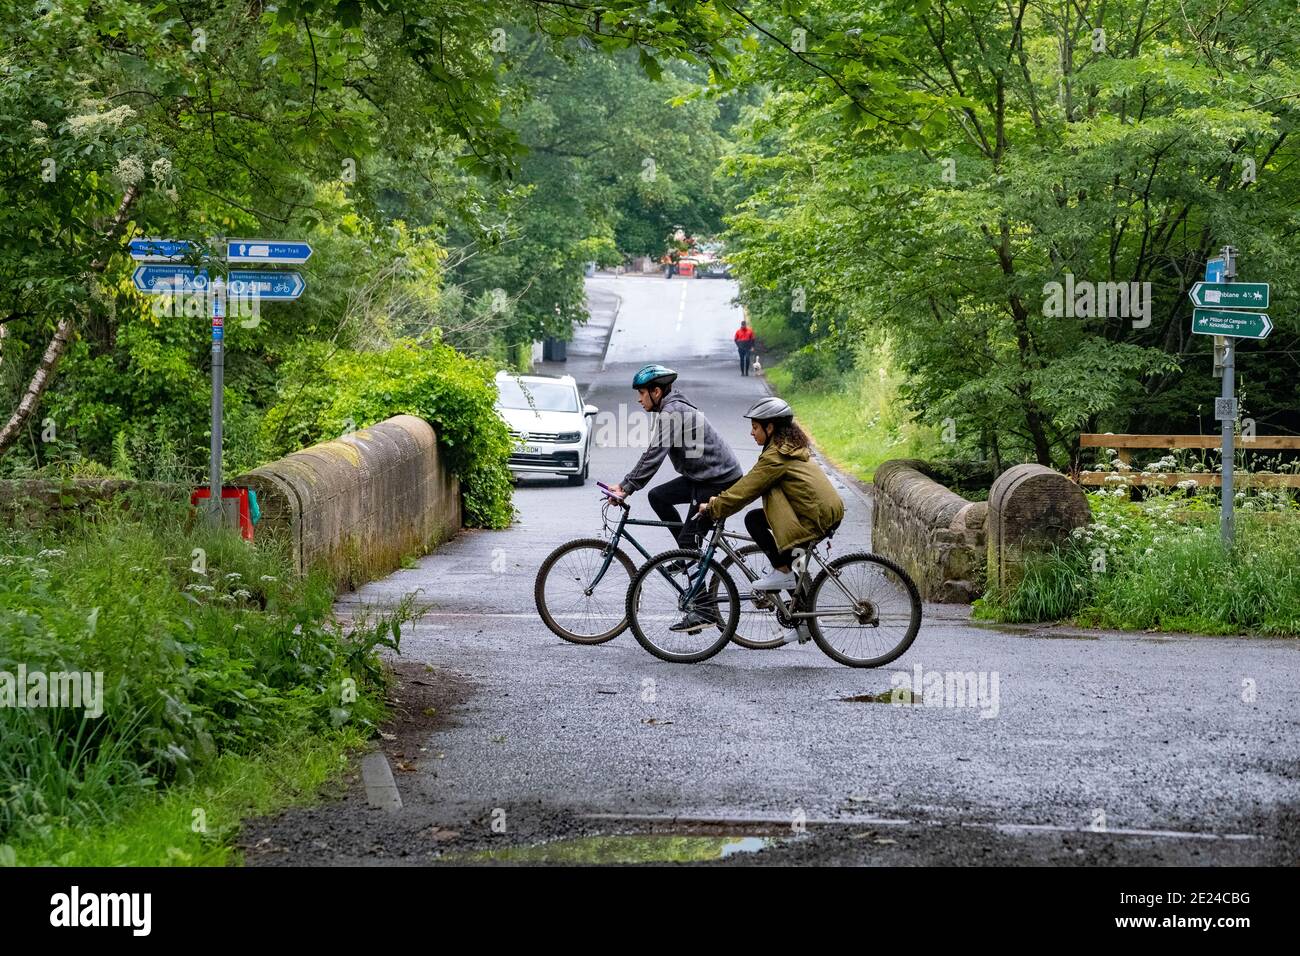 People cycling along roads and pathways Stock Photo